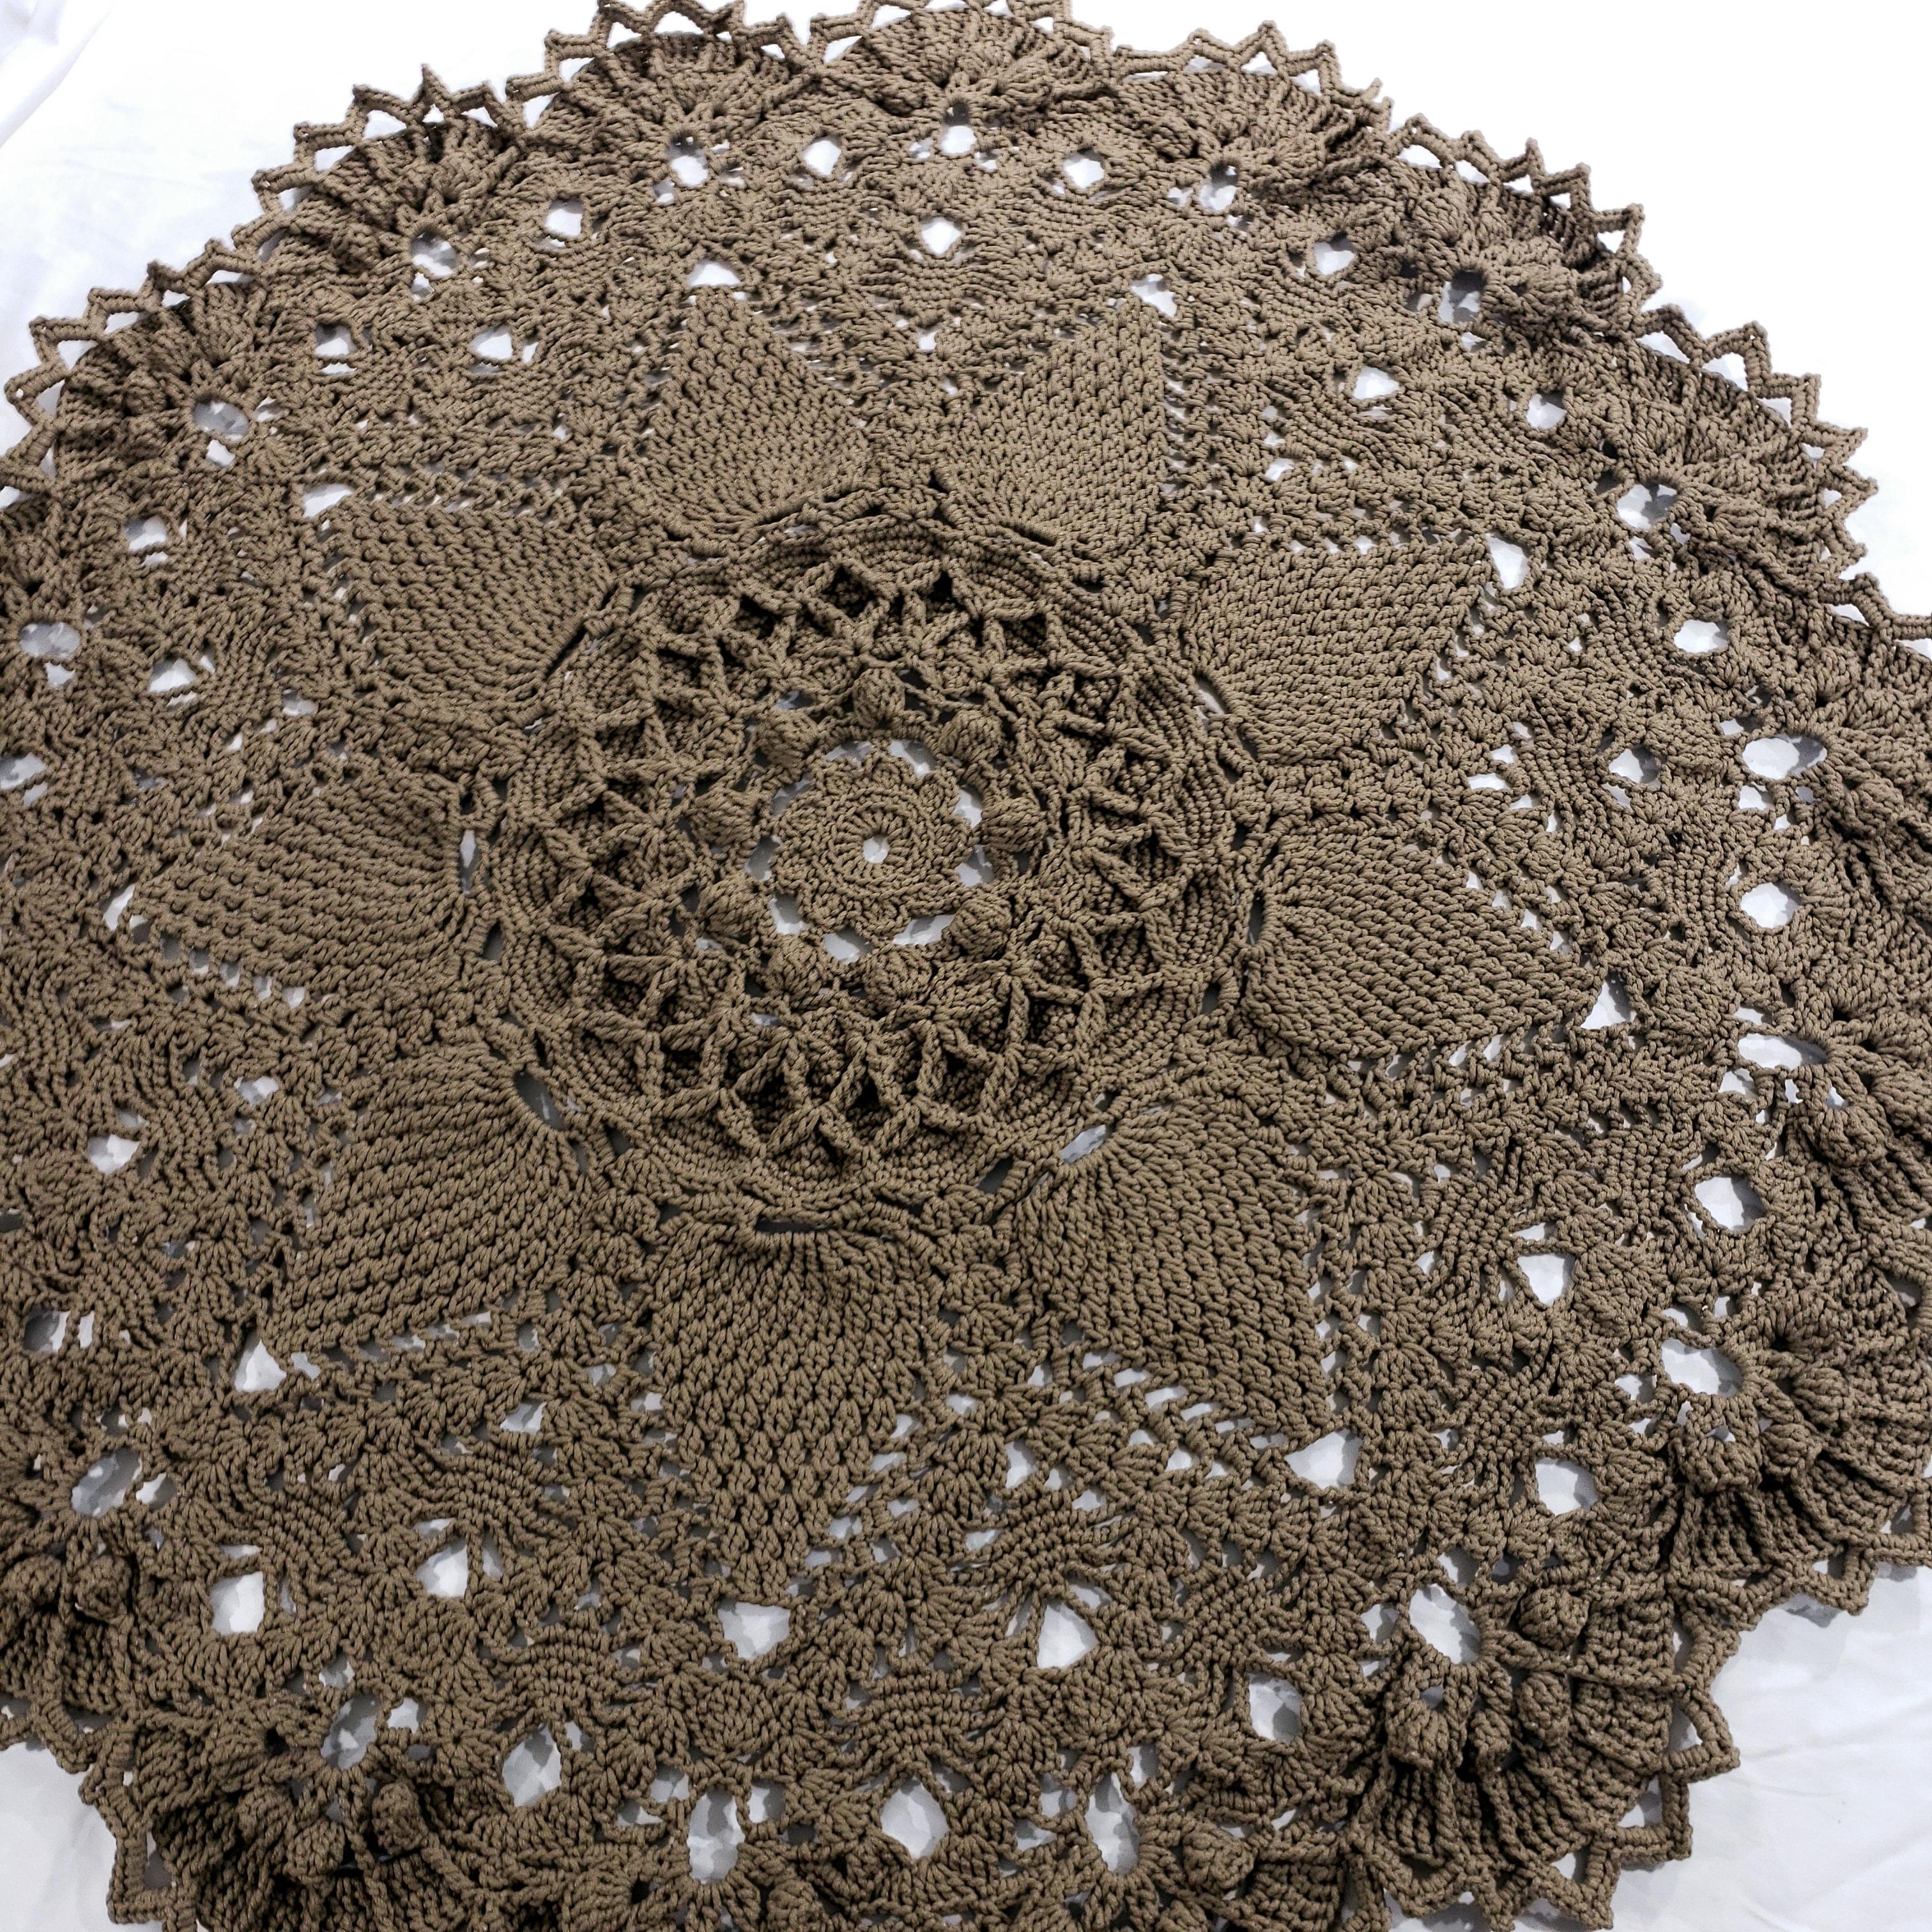 A crochet round rug with a traditional layered design, hand-made with classic Russian textile techniques. 
This luxurious modern rug with a vintage charm will add an elegant dimension to any room!

...

71 inches diameter
Hand made in